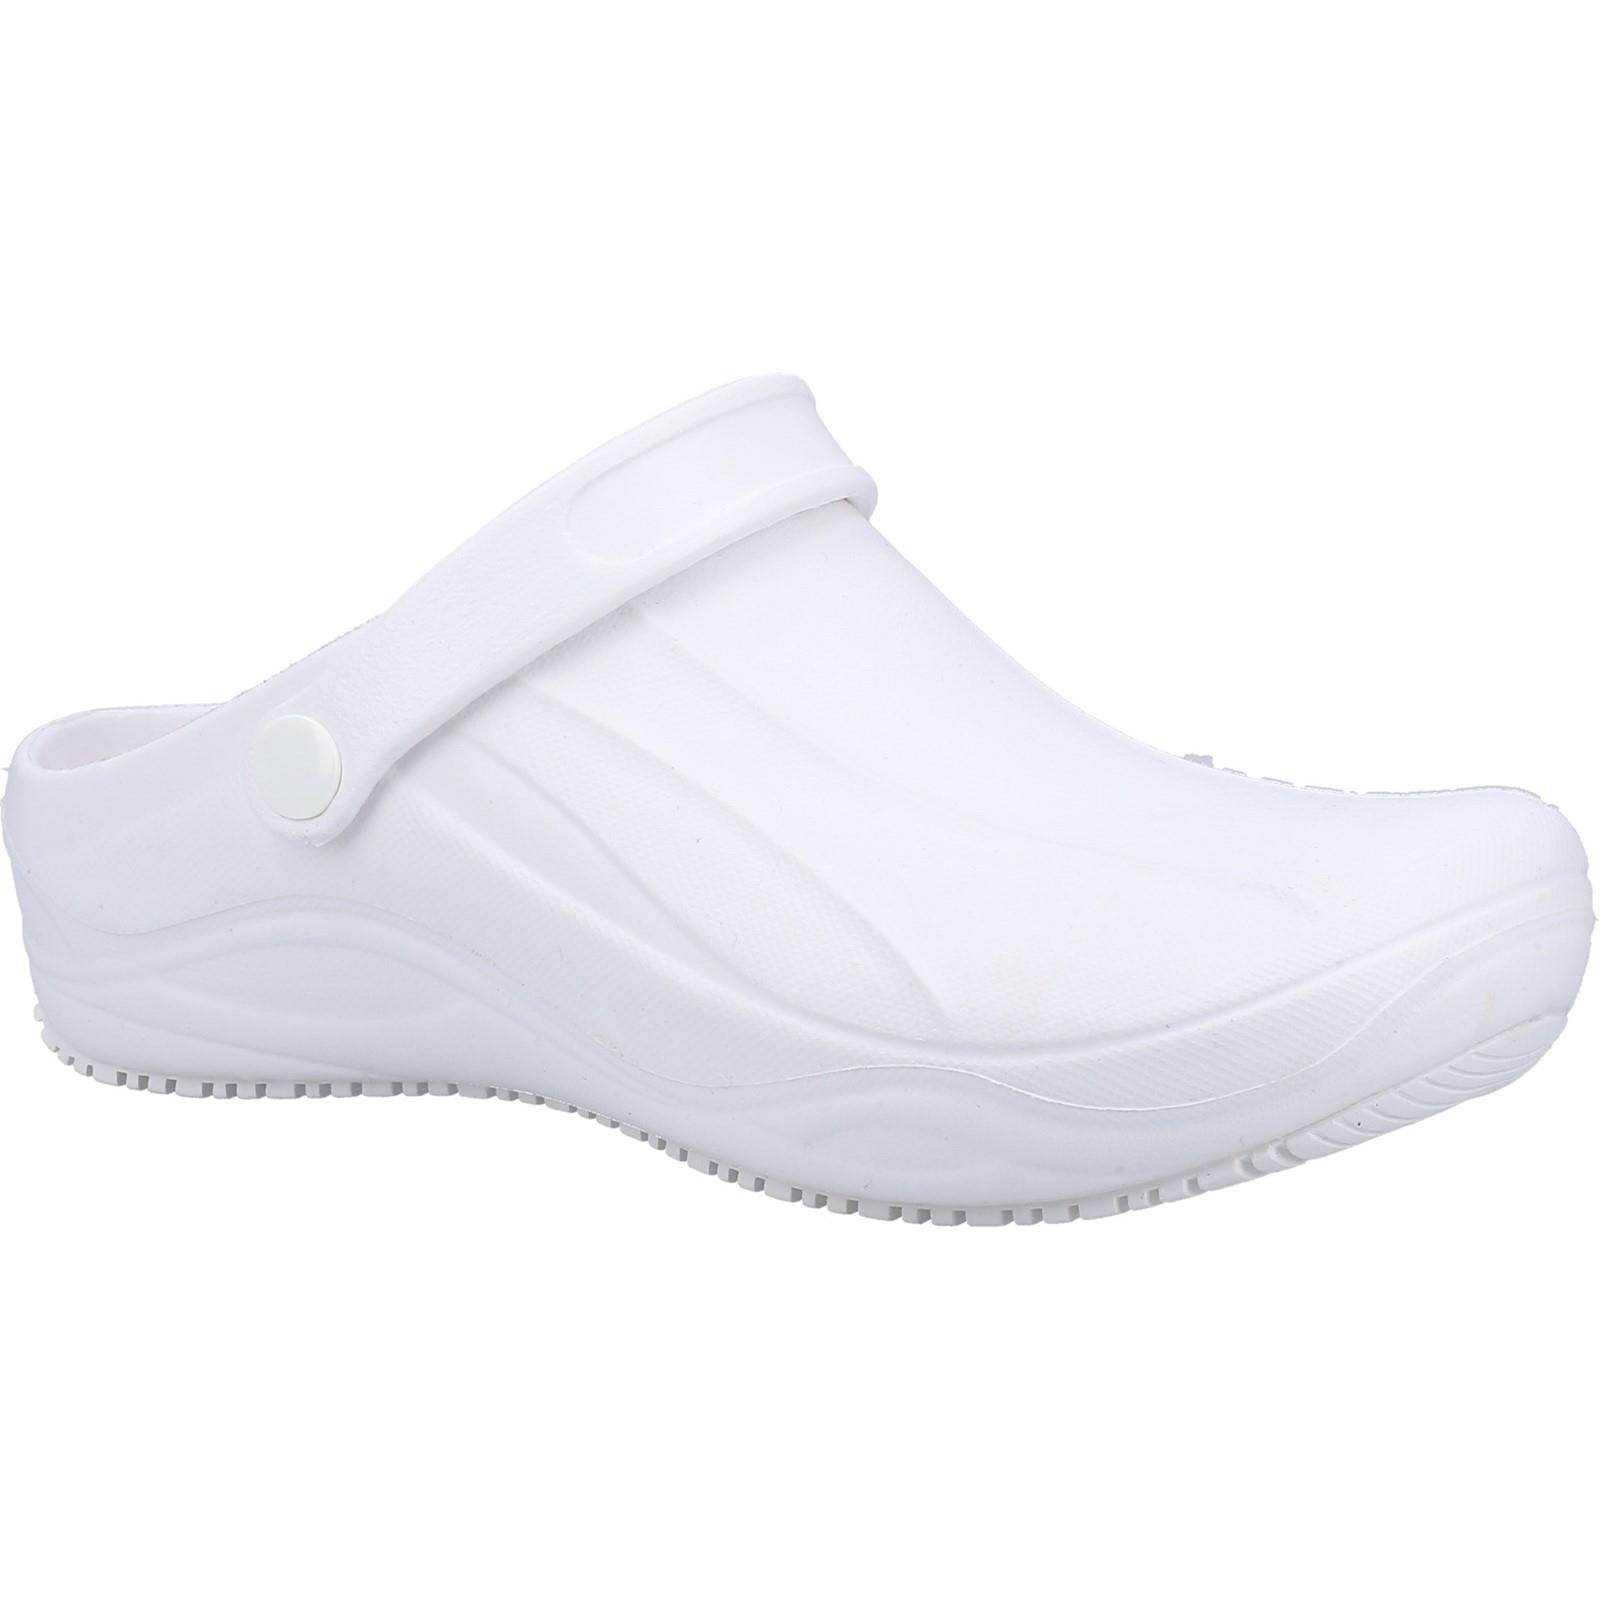 Safety Jogger Smooth OB white slip-resistant washable occupational clog